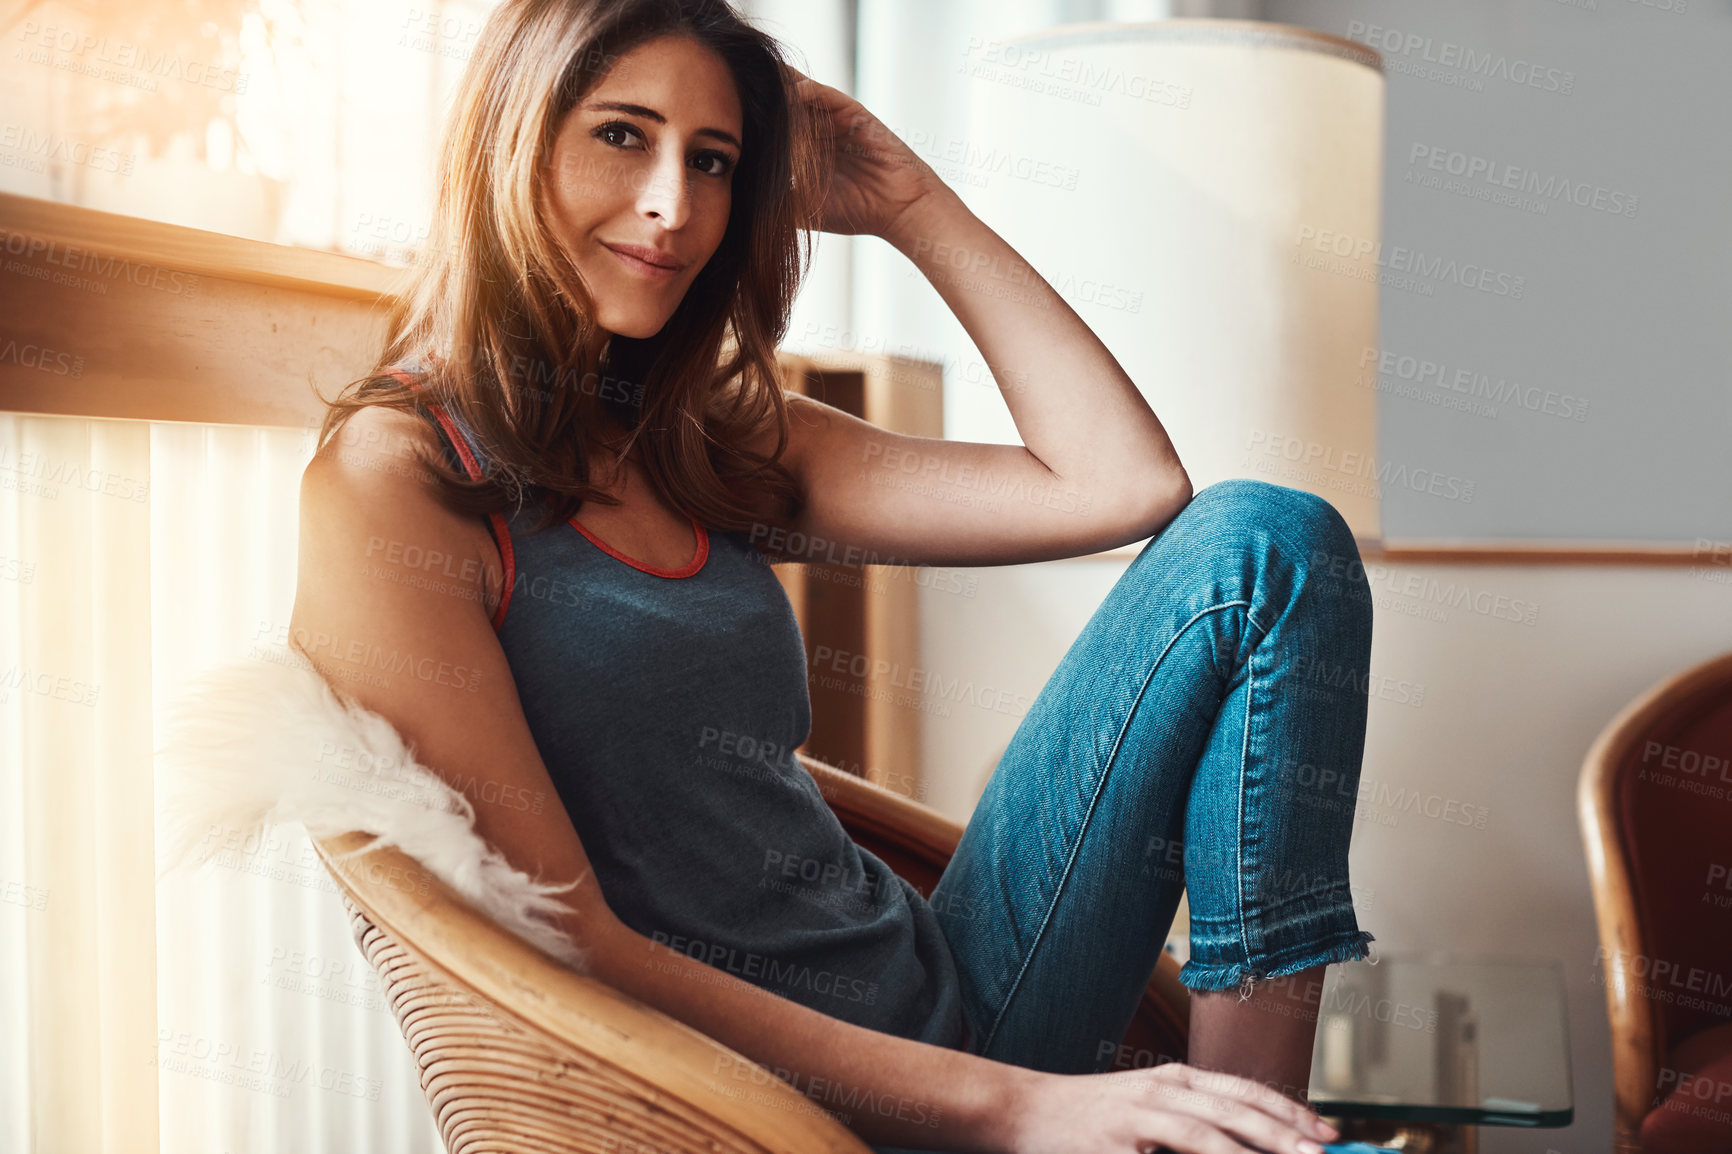 Buy stock photo Portrait of an attractive young woman relaxing at home